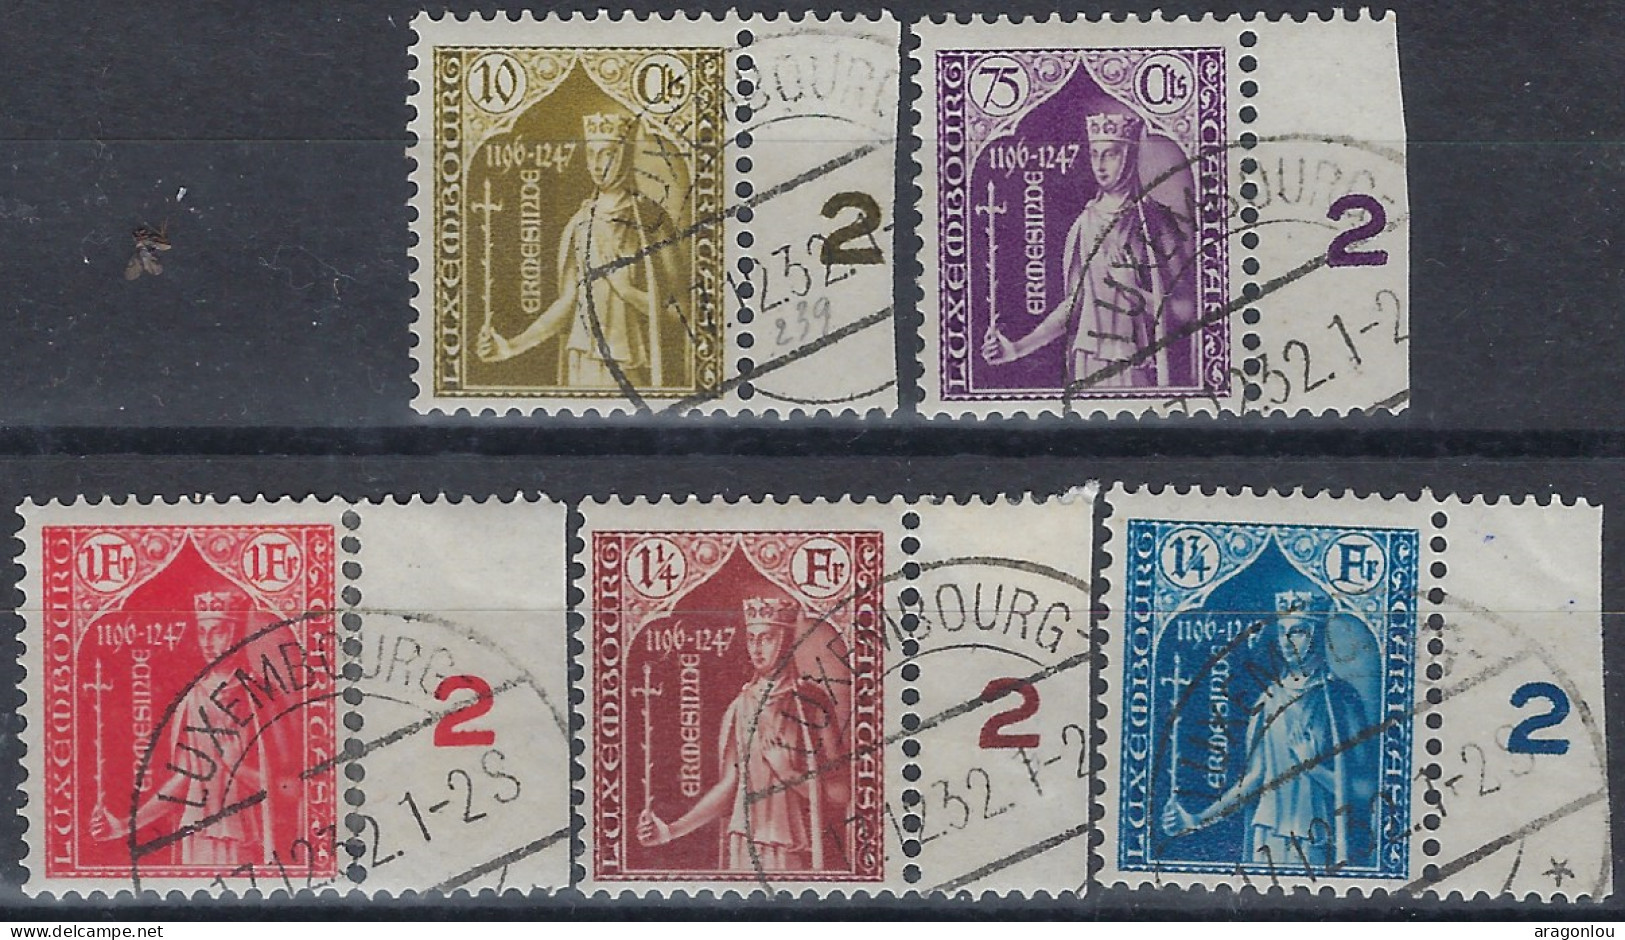 Luxembourg - Luxemburg - Timbres  1932  Série    Comtesse   Ermesinde    Caritas °   VC.140,- - Used Stamps